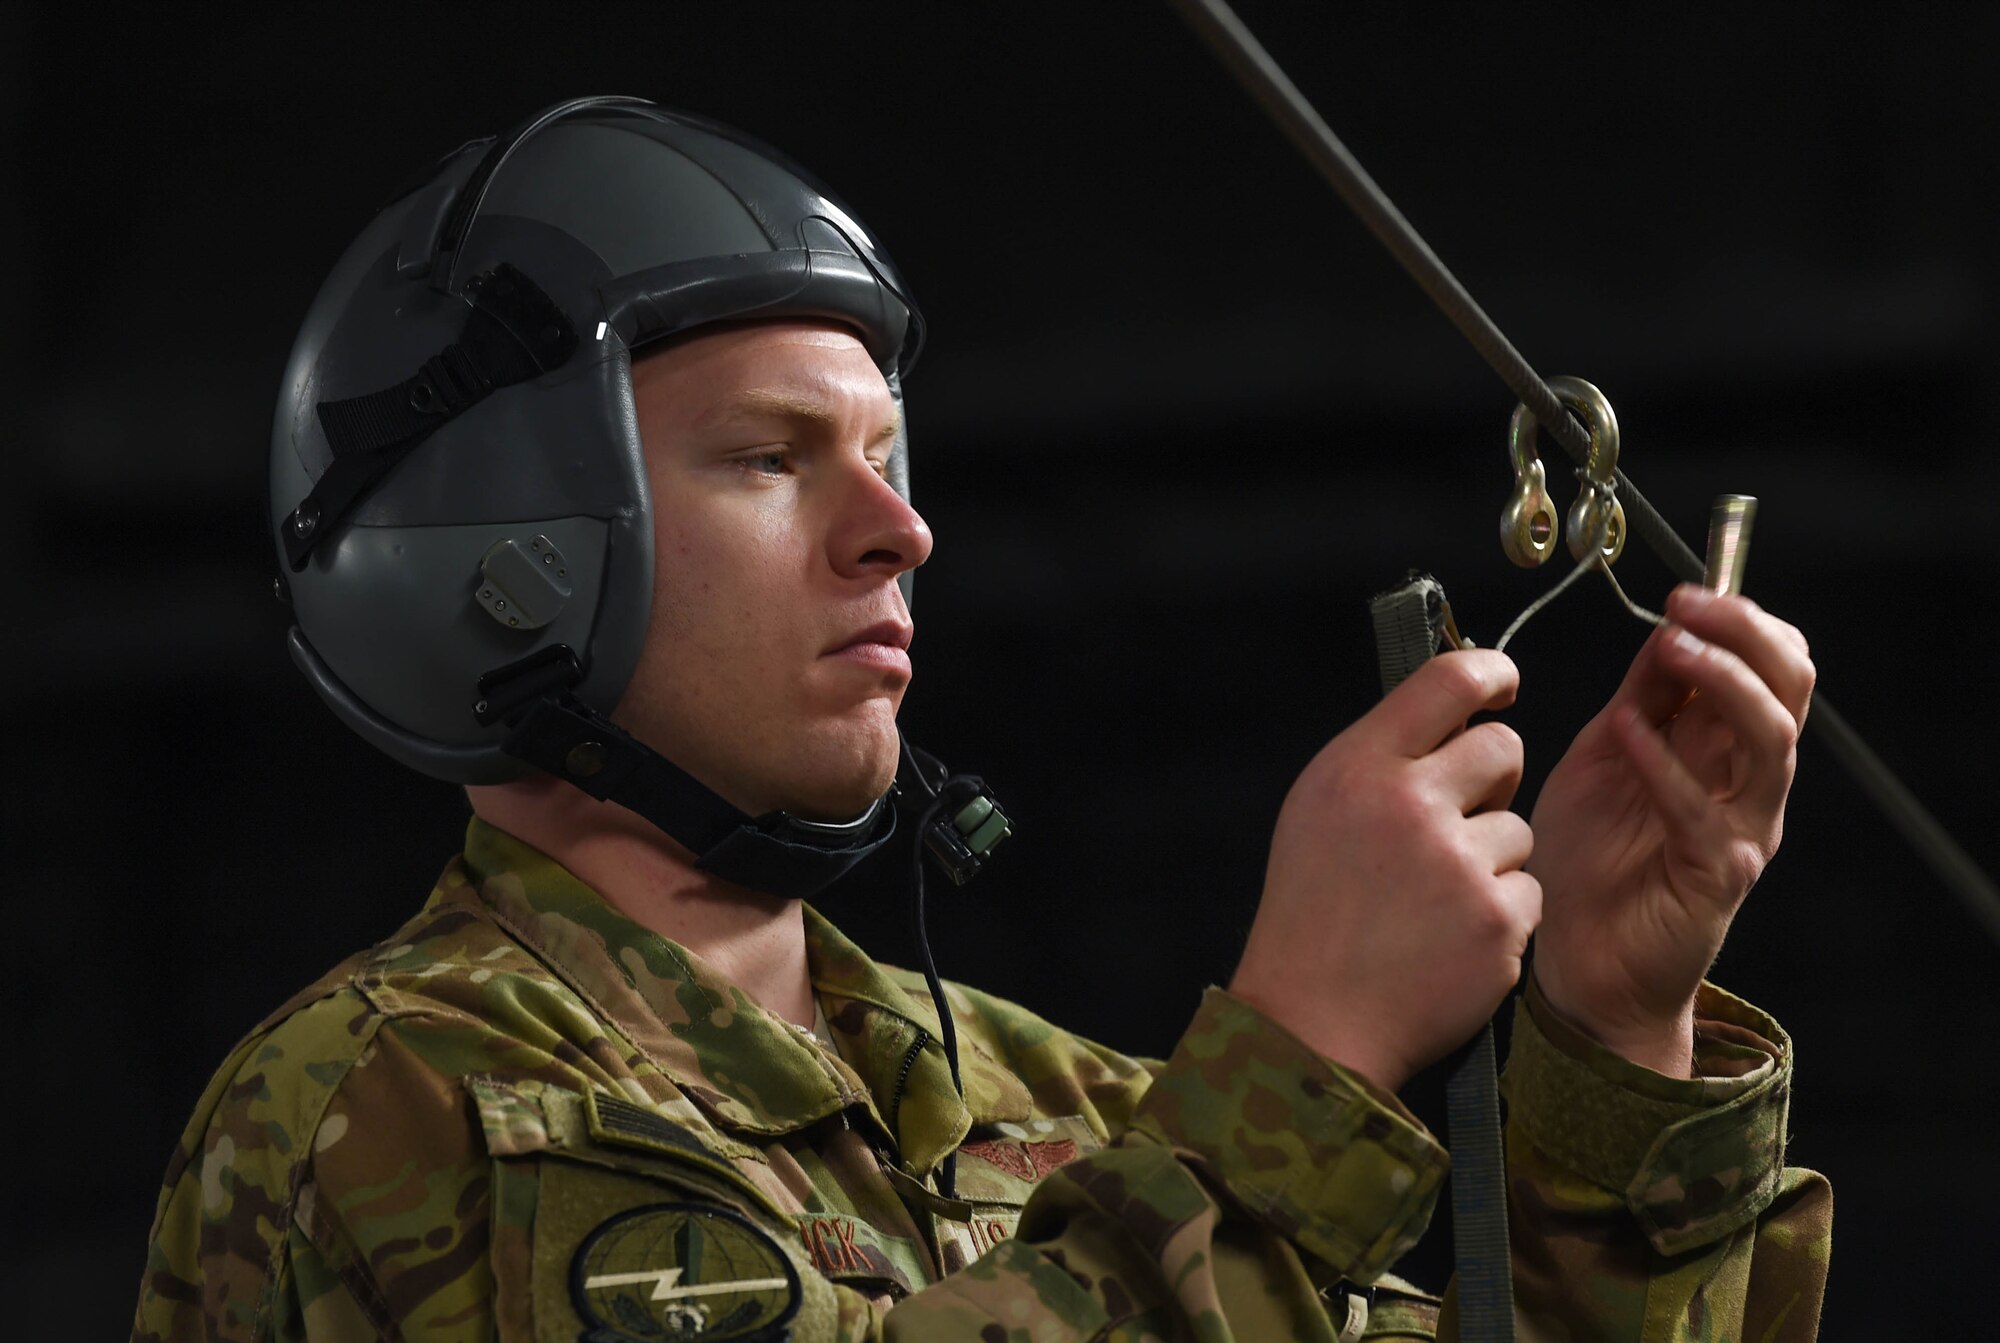 Staff Sgt. Matthew Duck, 7th Airlift Squadron loadmaster, unhooks a parachute cover after dropping two bundles out of a C-17 Globemaster III onto the Rainier Drop Zone during Exercise Rainier War near Moses Lake, Wash., June 6, 2018. During the exercise, 20 C-17s from the U.S. and Australia performed actual container delivery system (CDS) and heavy equipment airdrops at the Rainier Drop Zone near Moses Lake, and simulated improved CDS, CDS and high altitude low opening personnel airdrops throughout the western United States. (U.S. Air Force photo by Senior Airman Tryphena Mayhugh)